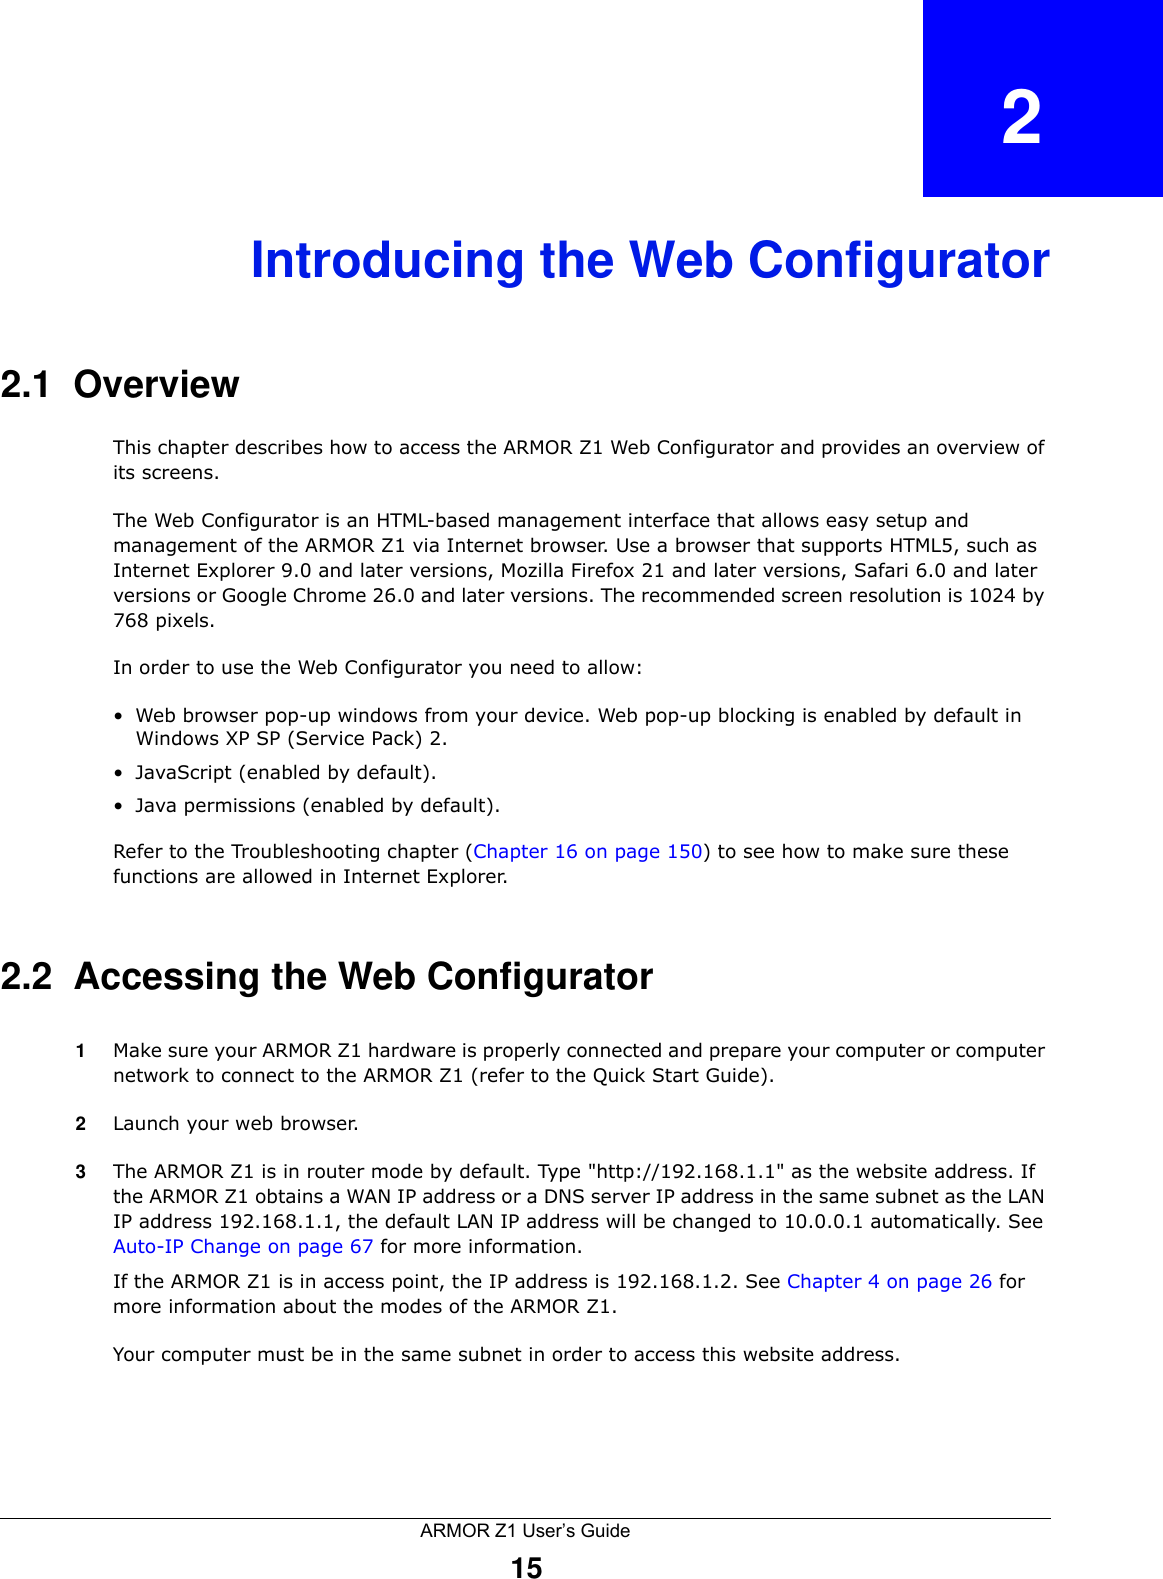 ARMOR Z1 User’s Guide15CHAPTER   2Introducing the Web Configurator2.1  OverviewThis chapter describes how to access the ARMOR Z1 Web Configurator and provides an overview of its screens.The Web Configurator is an HTML-based management interface that allows easy setup and management of the ARMOR Z1 via Internet browser. Use a browser that supports HTML5, such as Internet Explorer 9.0 and later versions, Mozilla Firefox 21 and later versions, Safari 6.0 and later versions or Google Chrome 26.0 and later versions. The recommended screen resolution is 1024 by 768 pixels.In order to use the Web Configurator you need to allow:• Web browser pop-up windows from your device. Web pop-up blocking is enabled by default in Windows XP SP (Service Pack) 2.• JavaScript (enabled by default).• Java permissions (enabled by default).Refer to the Troubleshooting chapter (Chapter 16 on page 150) to see how to make sure these functions are allowed in Internet Explorer.2.2  Accessing the Web Configurator1Make sure your ARMOR Z1 hardware is properly connected and prepare your computer or computer network to connect to the ARMOR Z1 (refer to the Quick Start Guide).2Launch your web browser.3The ARMOR Z1 is in router mode by default. Type &quot;http://192.168.1.1&quot; as the website address. If the ARMOR Z1 obtains a WAN IP address or a DNS server IP address in the same subnet as the LAN IP address 192.168.1.1, the default LAN IP address will be changed to 10.0.0.1 automatically. See Auto-IP Change on page 67 for more information.If the ARMOR Z1 is in access point, the IP address is 192.168.1.2. See Chapter 4 on page 26 for more information about the modes of the ARMOR Z1.Your computer must be in the same subnet in order to access this website address.